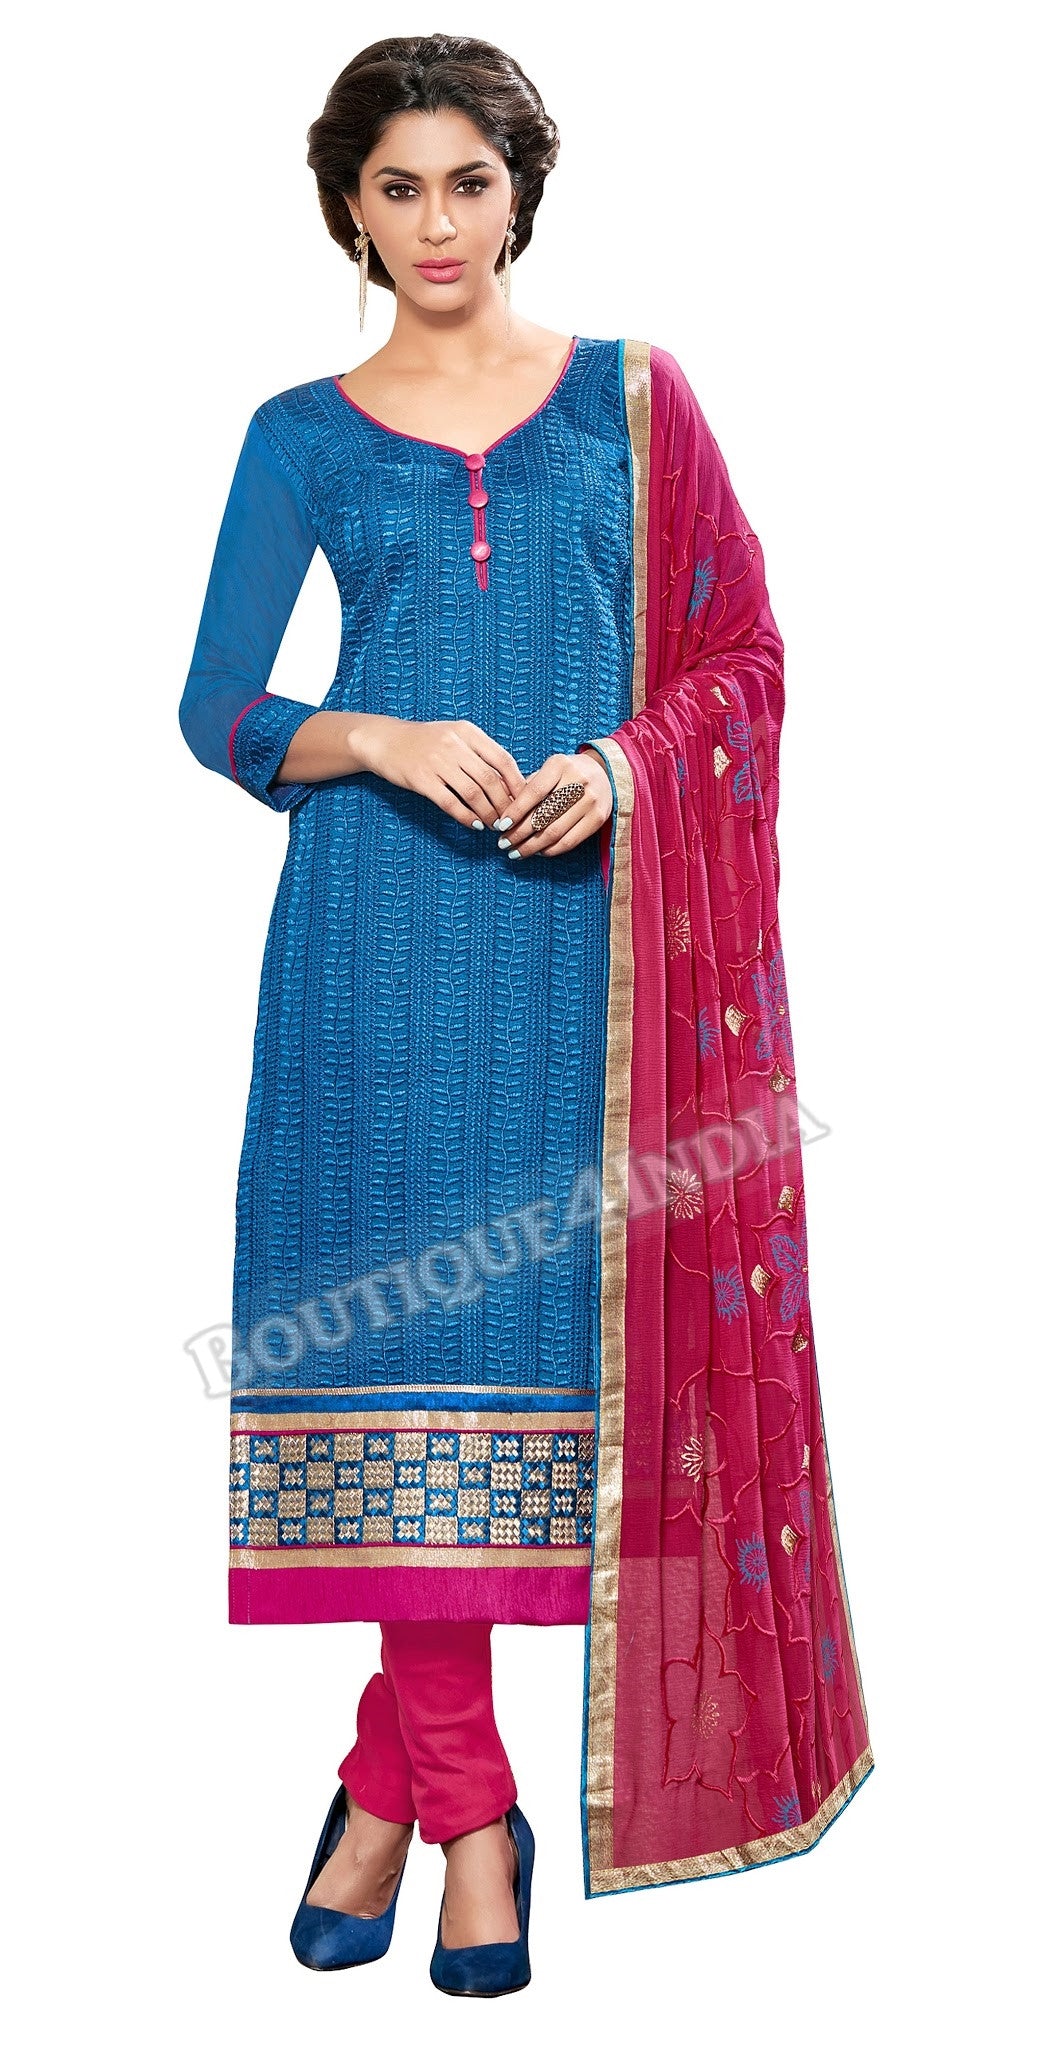 Light Blue Color Embroidered Chanderi Straight Cut Salwar Suit